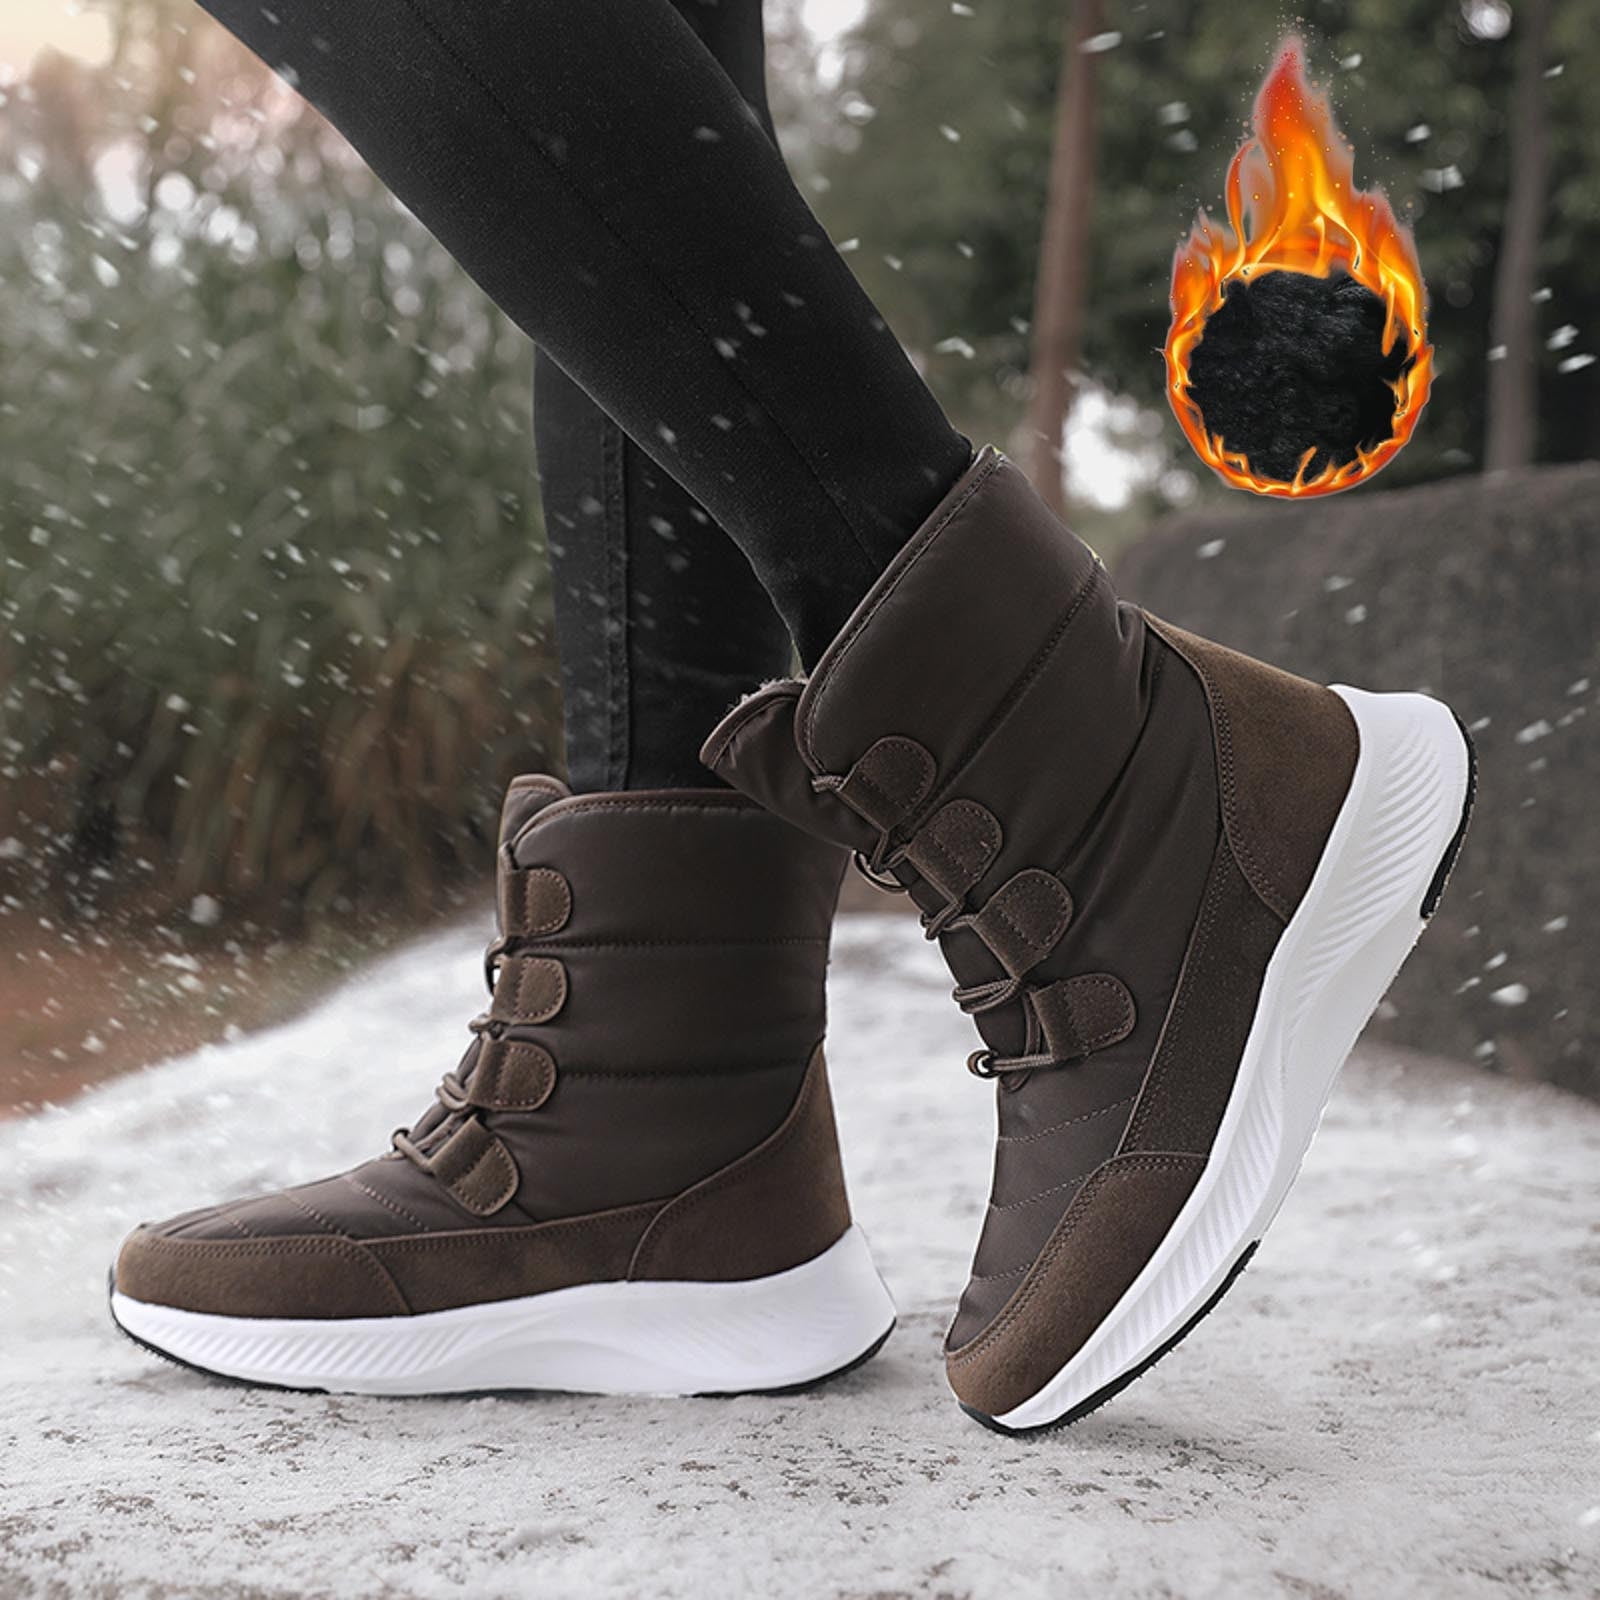 PMUYBHF Non Slip Casual Boot Waterproof Ankle Boots